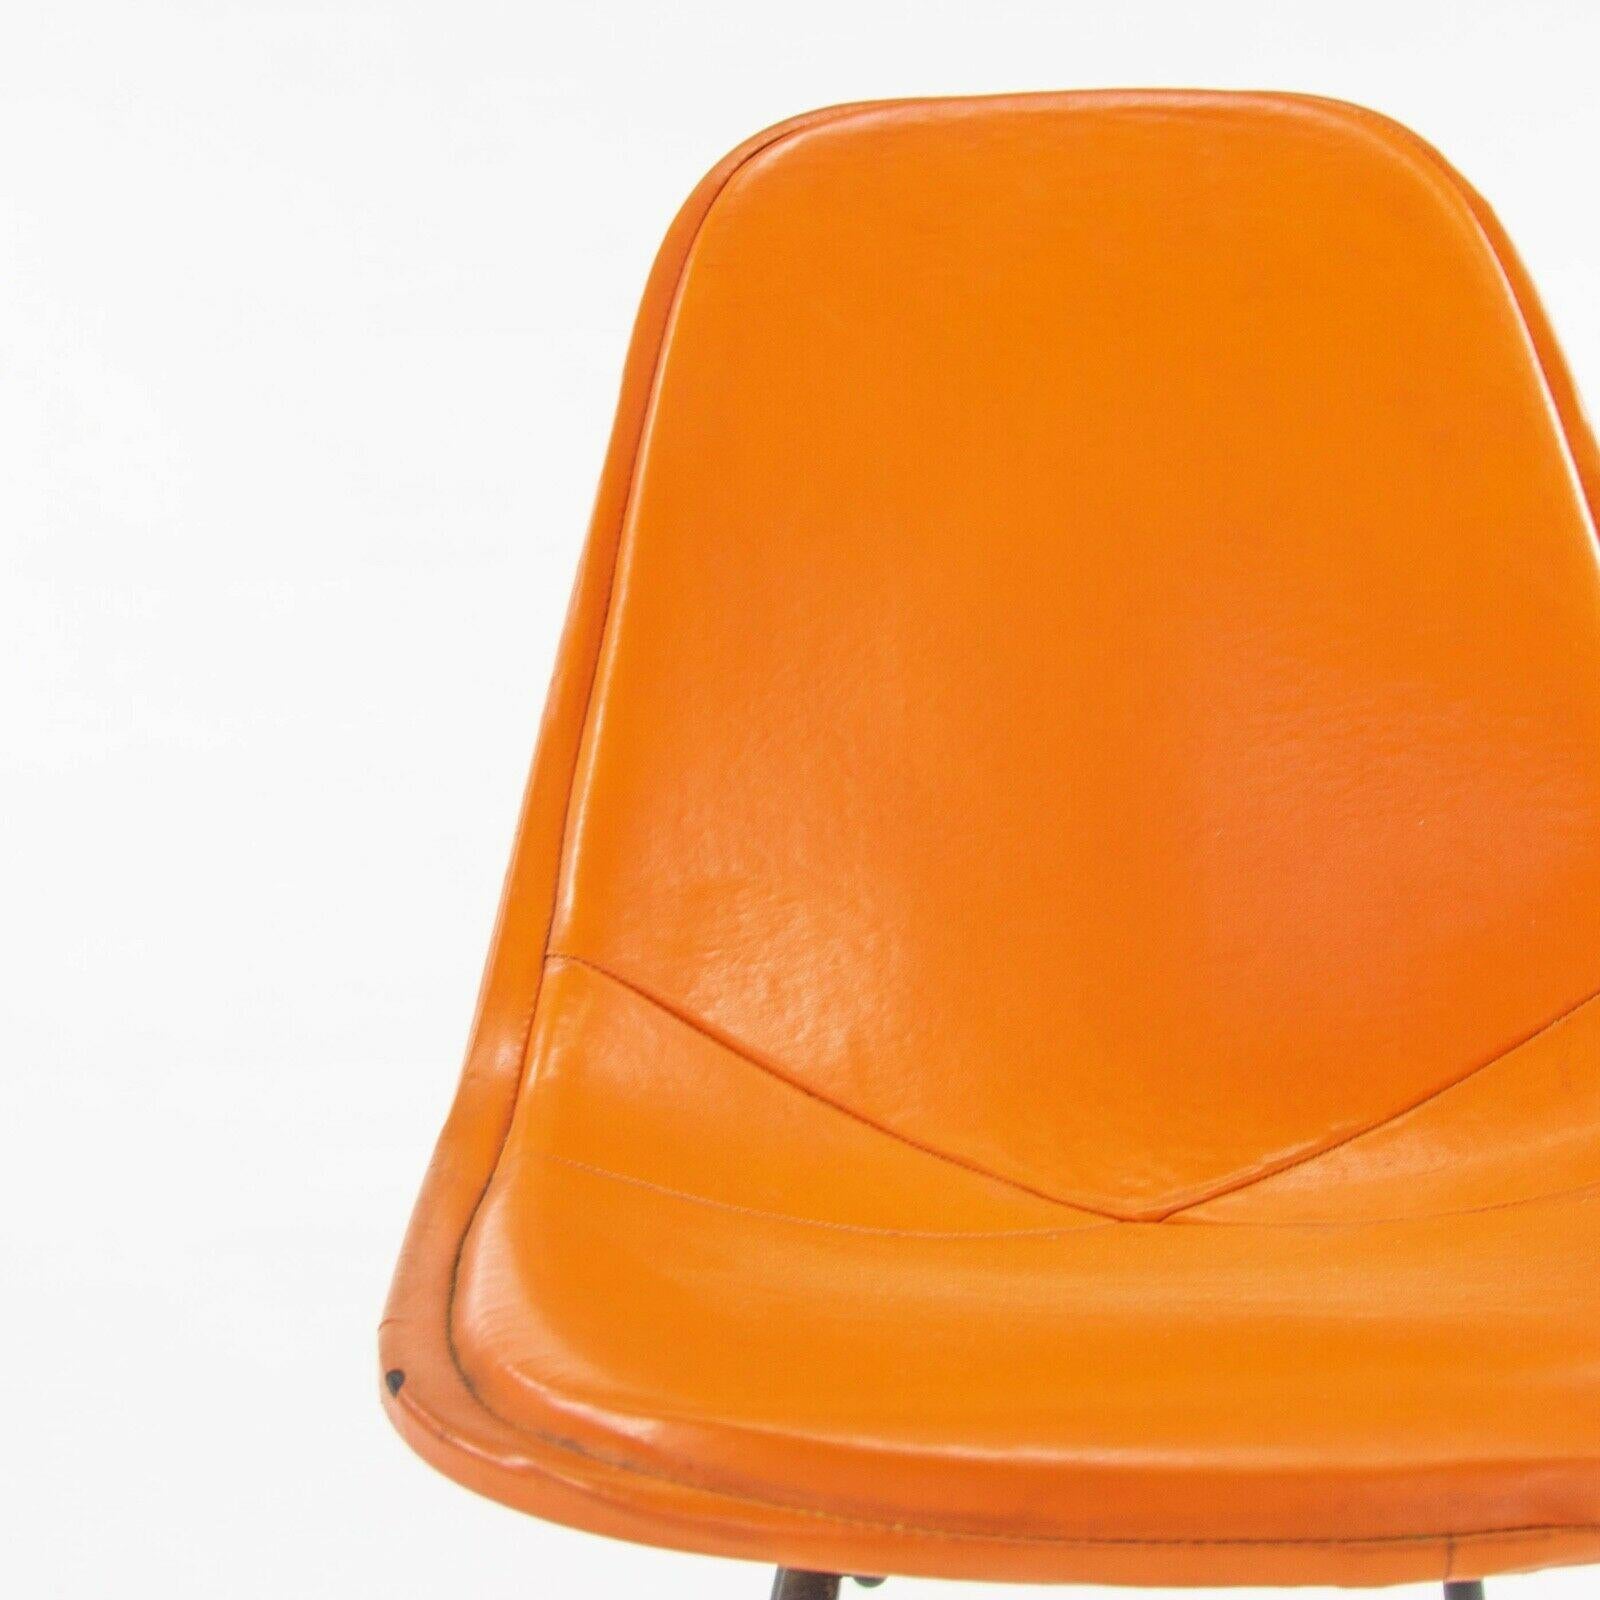 1957 Herman Miller Eames DKX Wire Dining Chair with Full Naugahyde Orange Pad For Sale 4